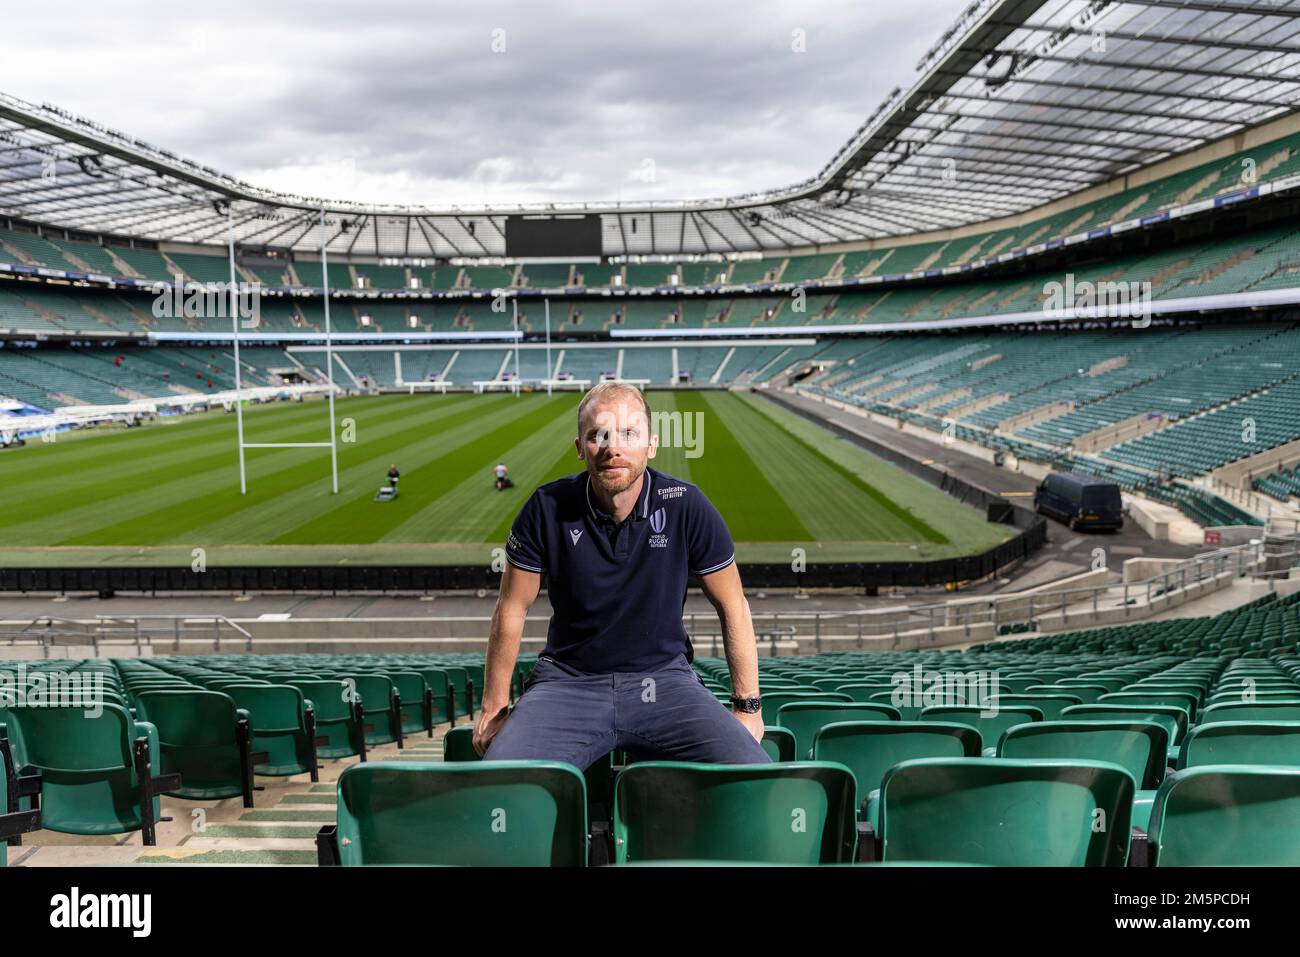 Wayne Barnes, photographed at Twickenham, English international rugby union referee and barrister. He is a regular referee in the English Premiership. Stock Photo